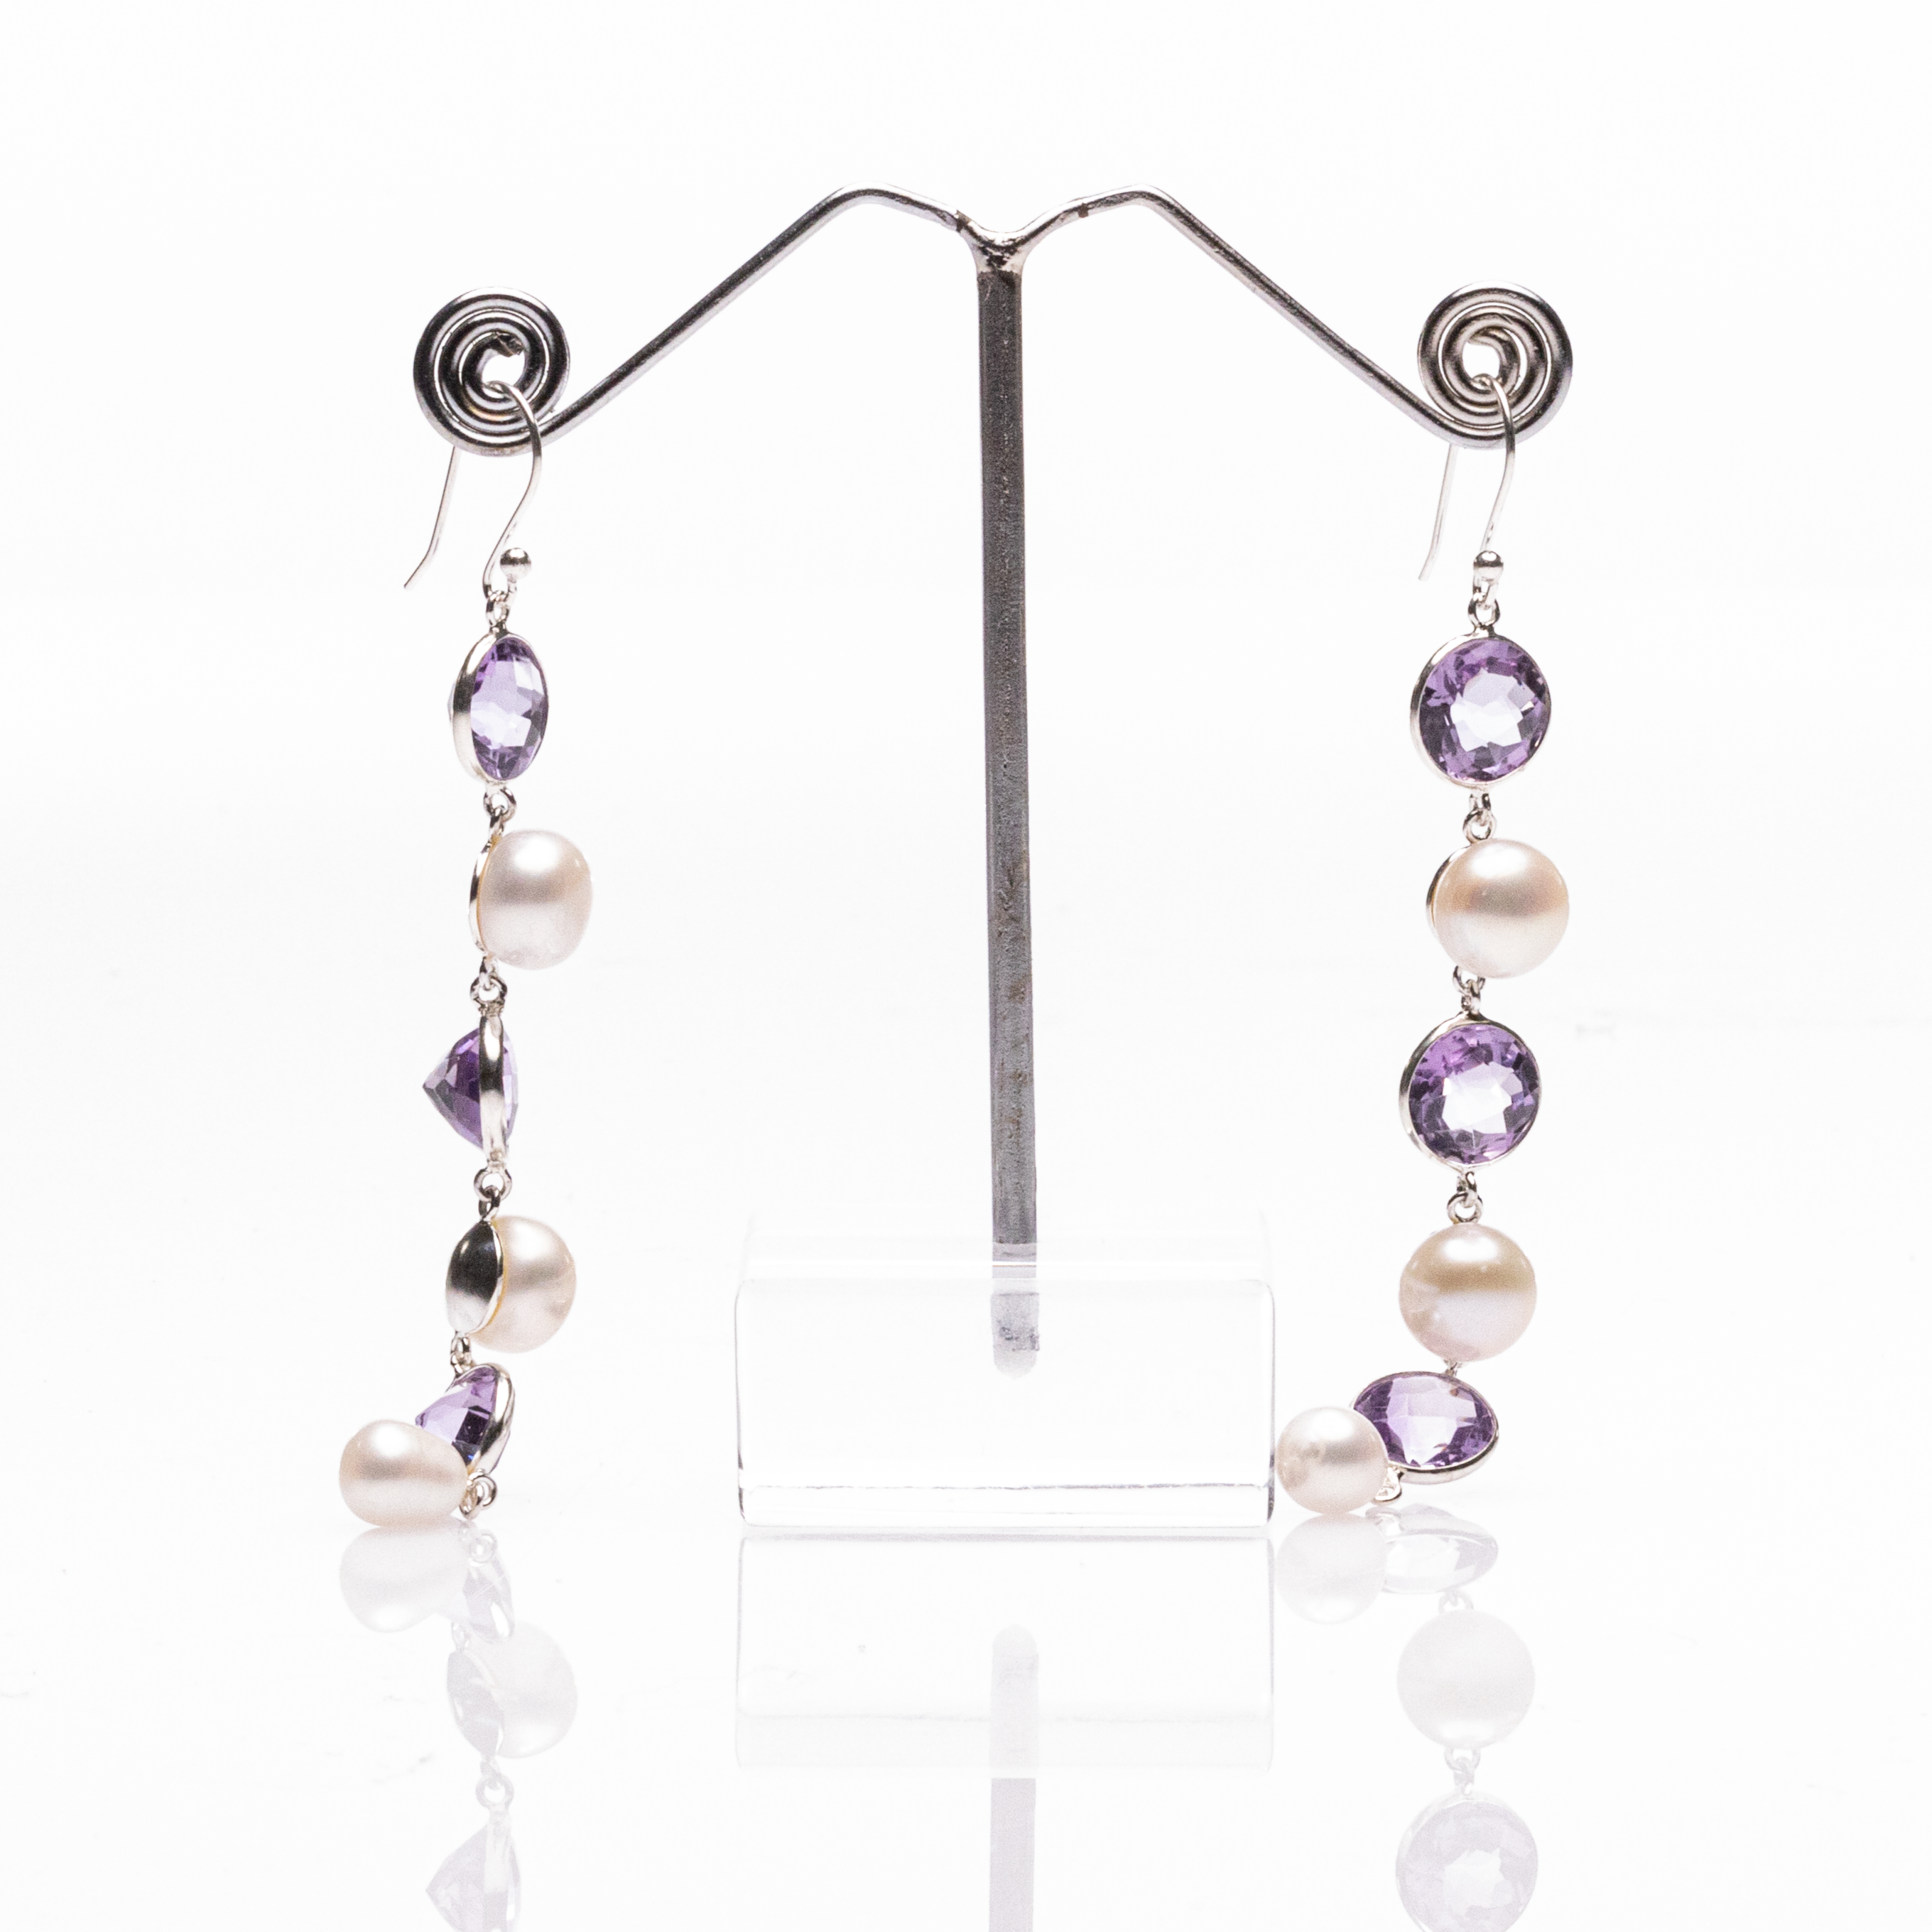 Outer-space Inspired Keshi Pearl Earrings, Purple Amethyst and Peacock Pearl  Wire Wrapped Earrings in Copper | Pebbles at my Feet